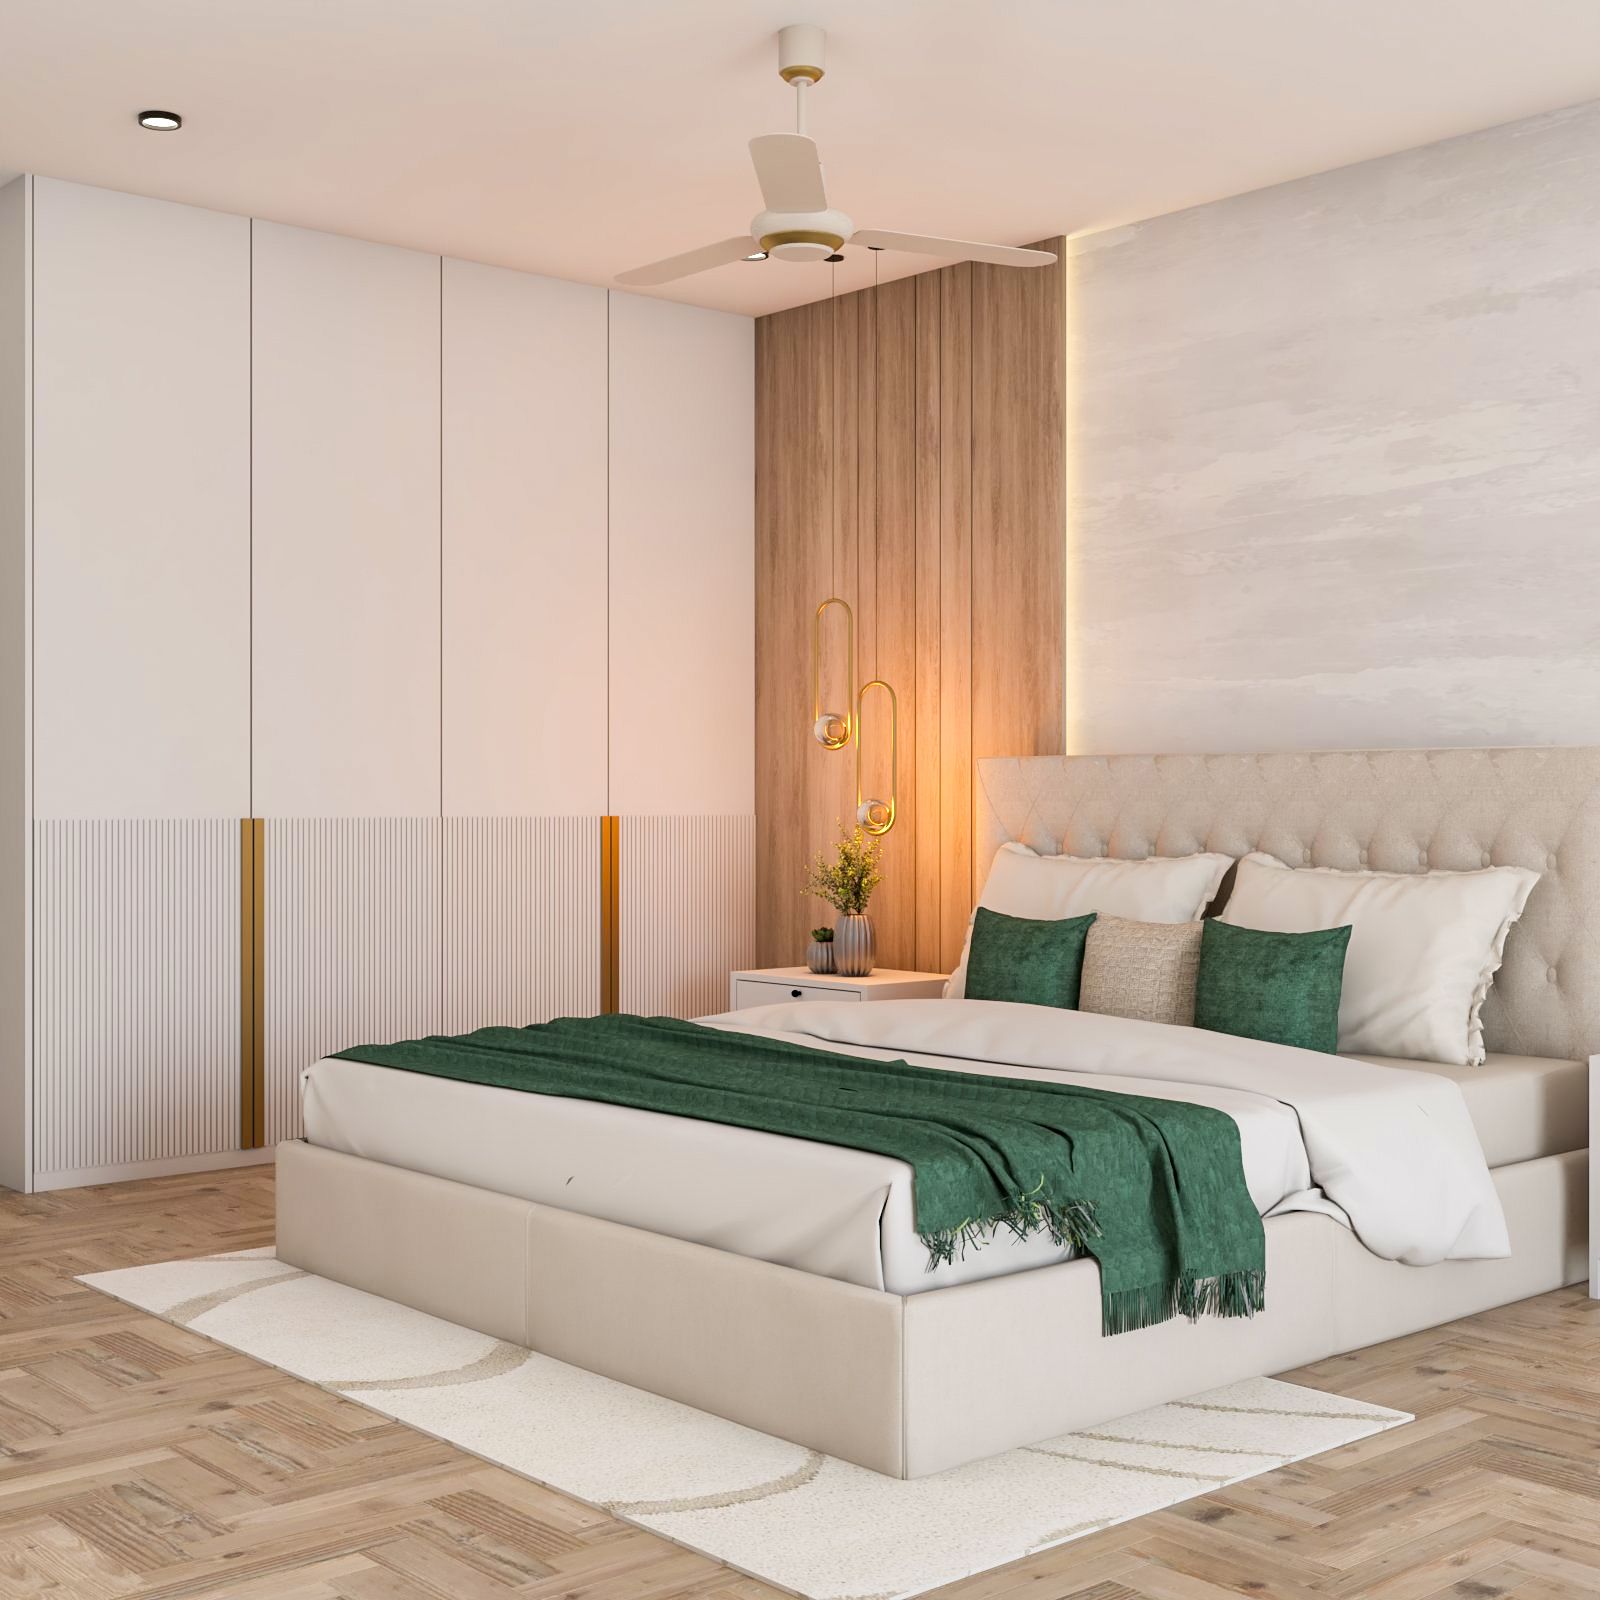 Scandinavian Master Bedroom Design With Off-White Bed And Tufted Headboard